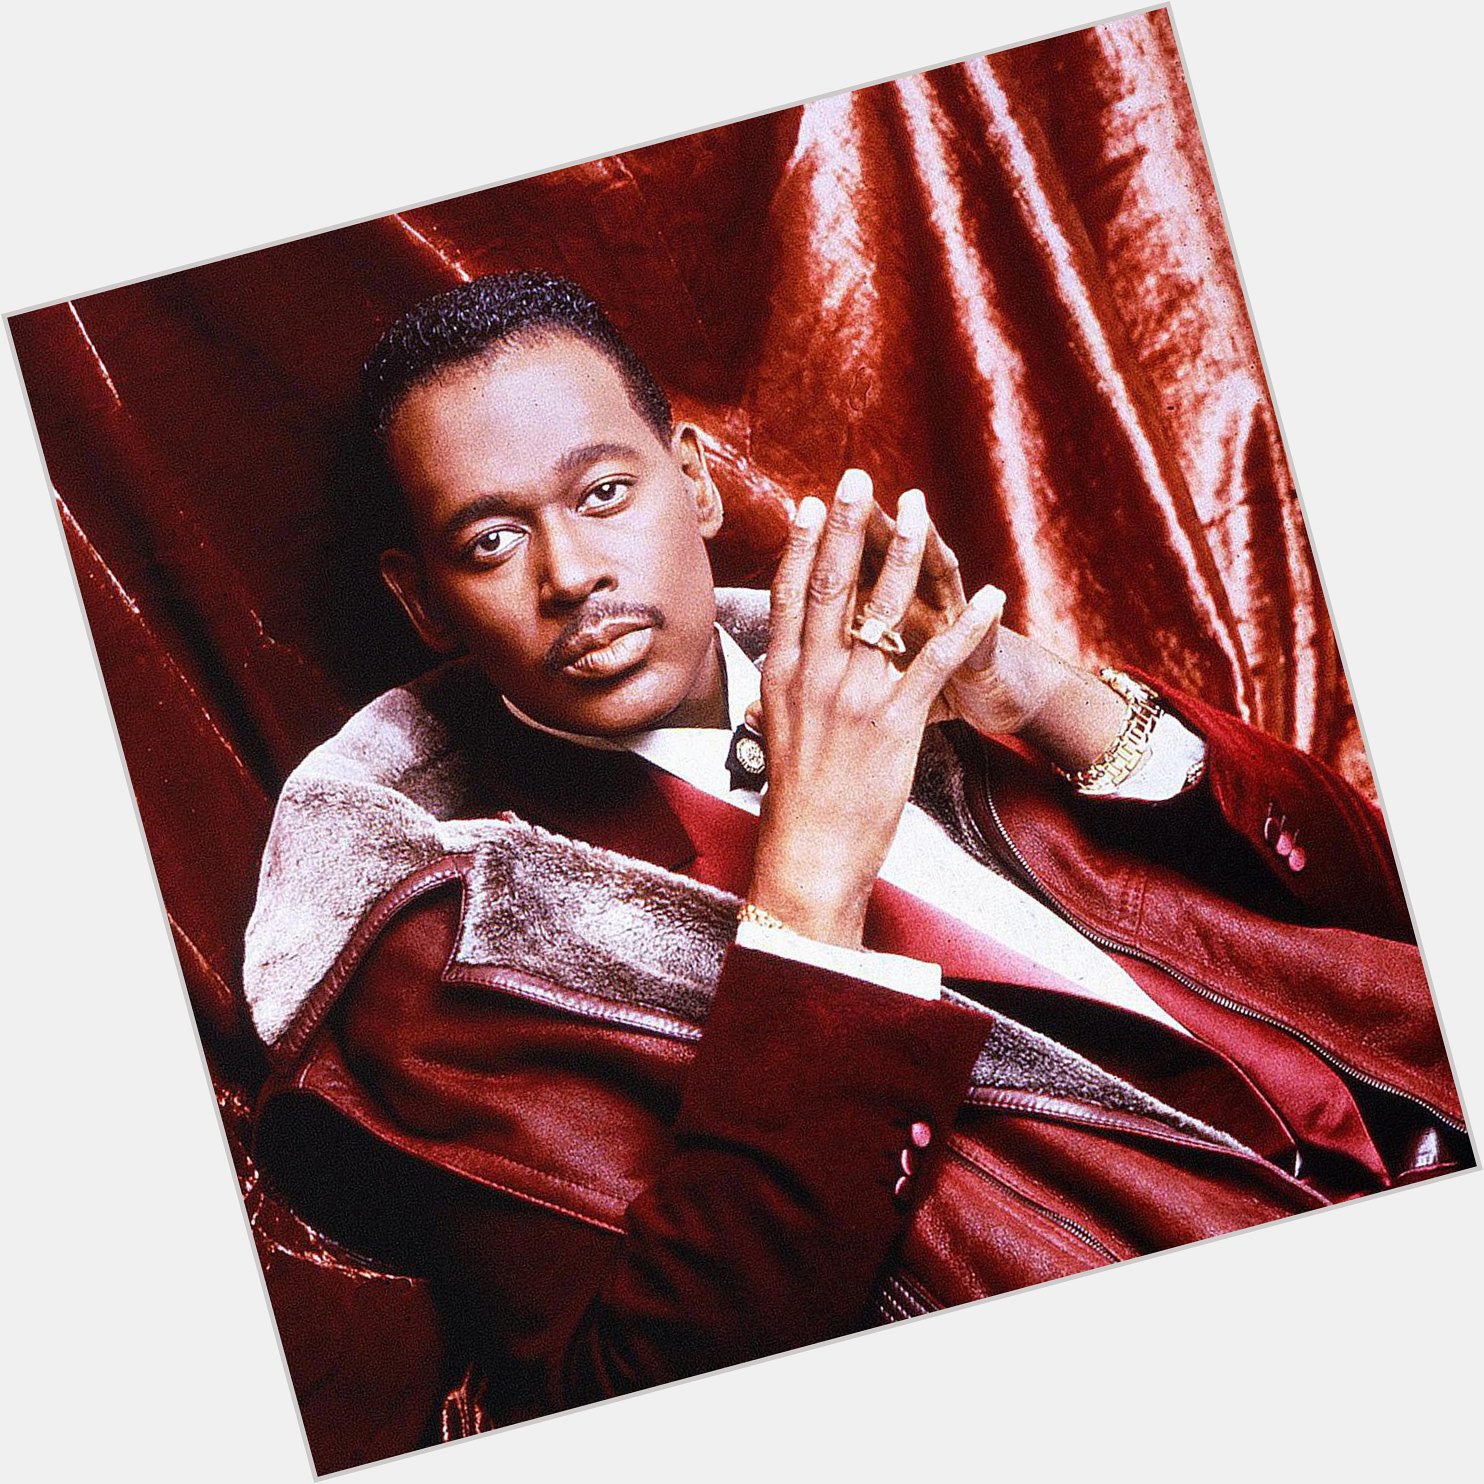 Happy 70th birthday to one of the greatest & most legendary vocalists of all time, luther vandross! 